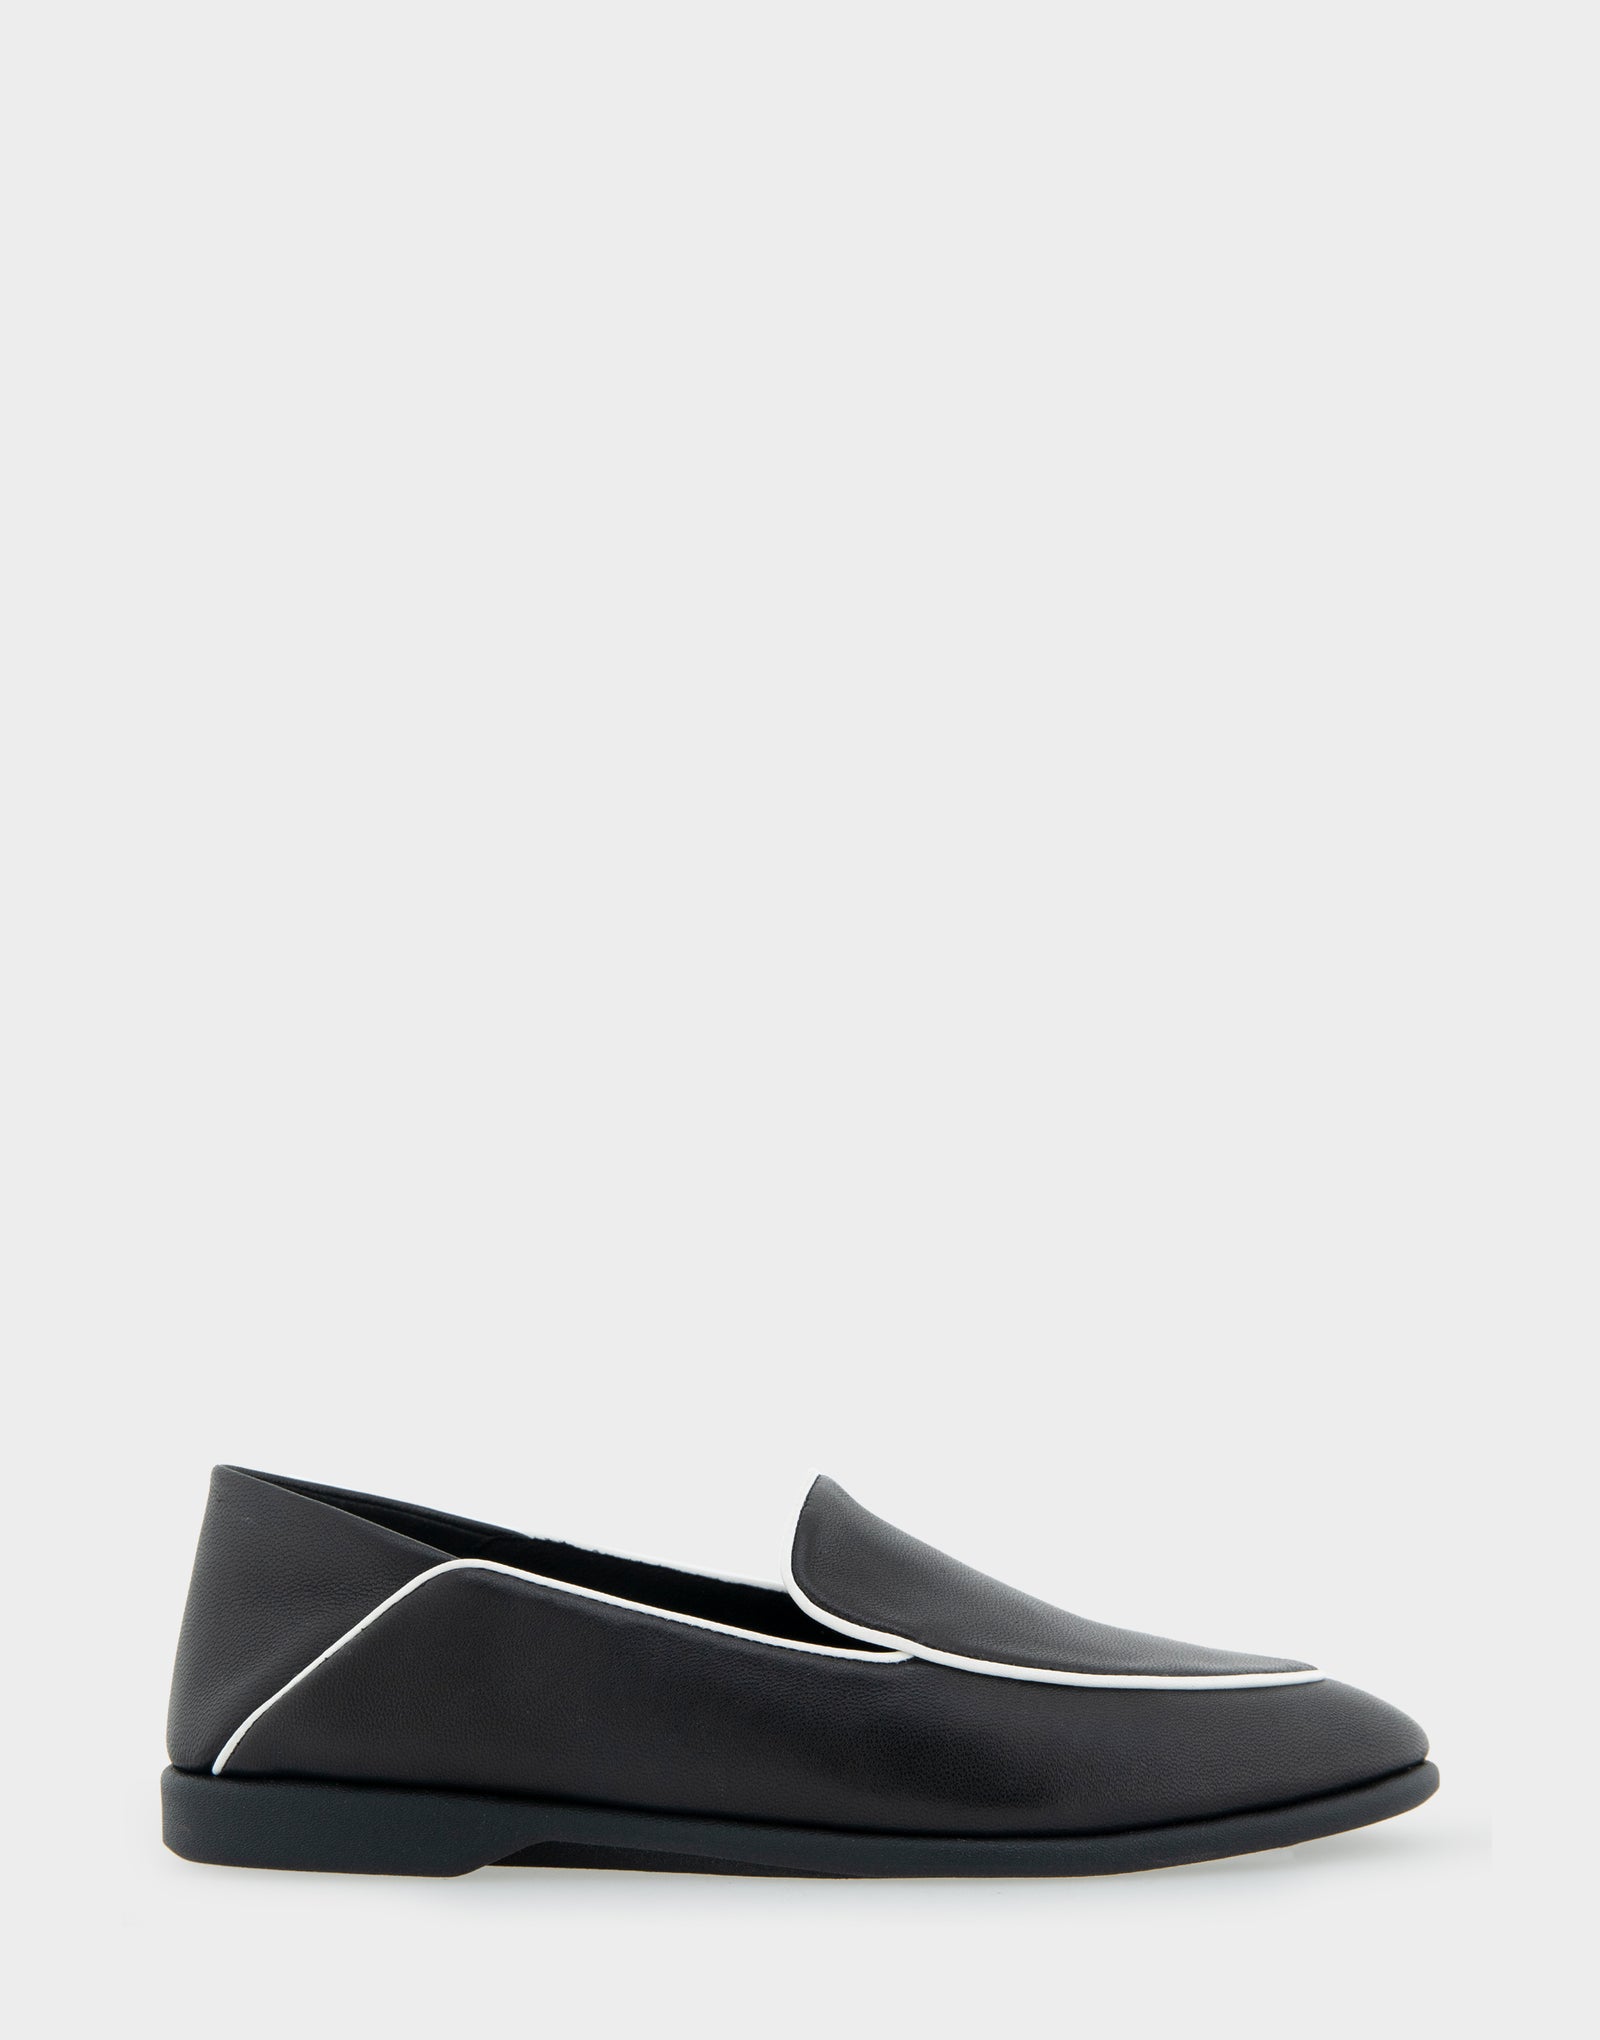 Women's Collapsible Back Loafer in Black Leather